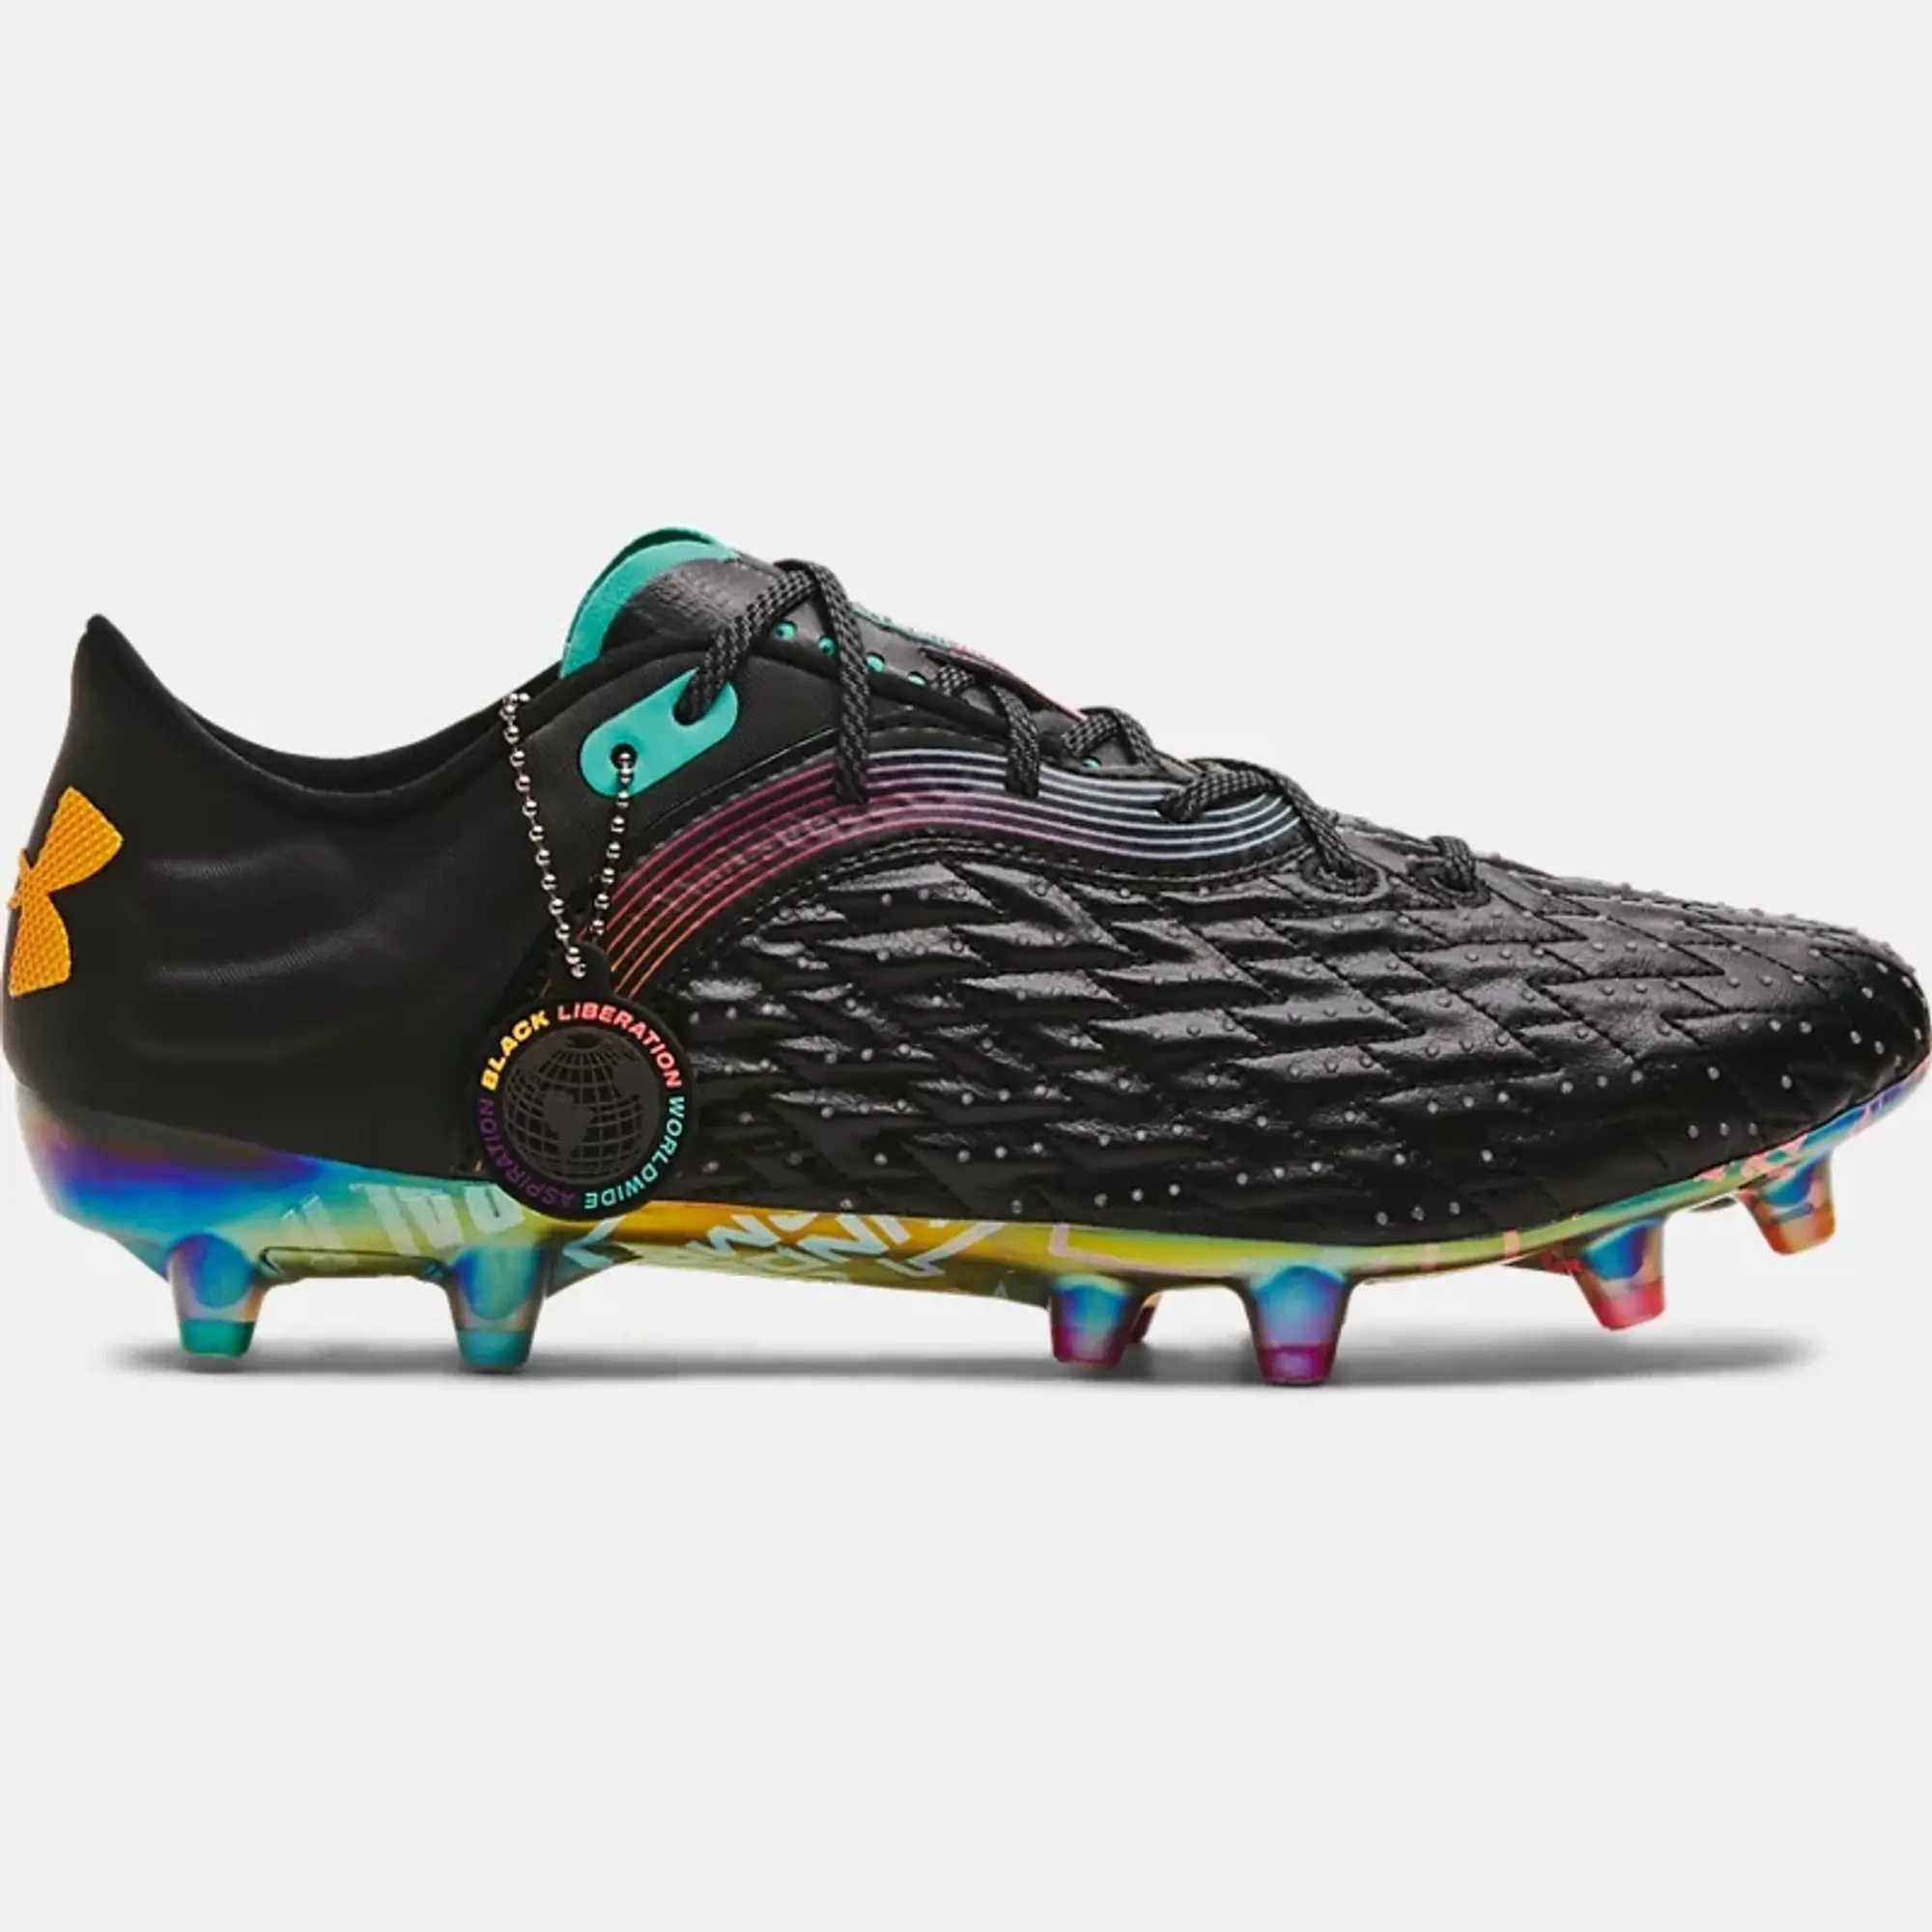 Unisex  Under Armour  Clone Magnetico Pro 2.0 FG Black History Month Football Boots Black / Black / Cruise Gold